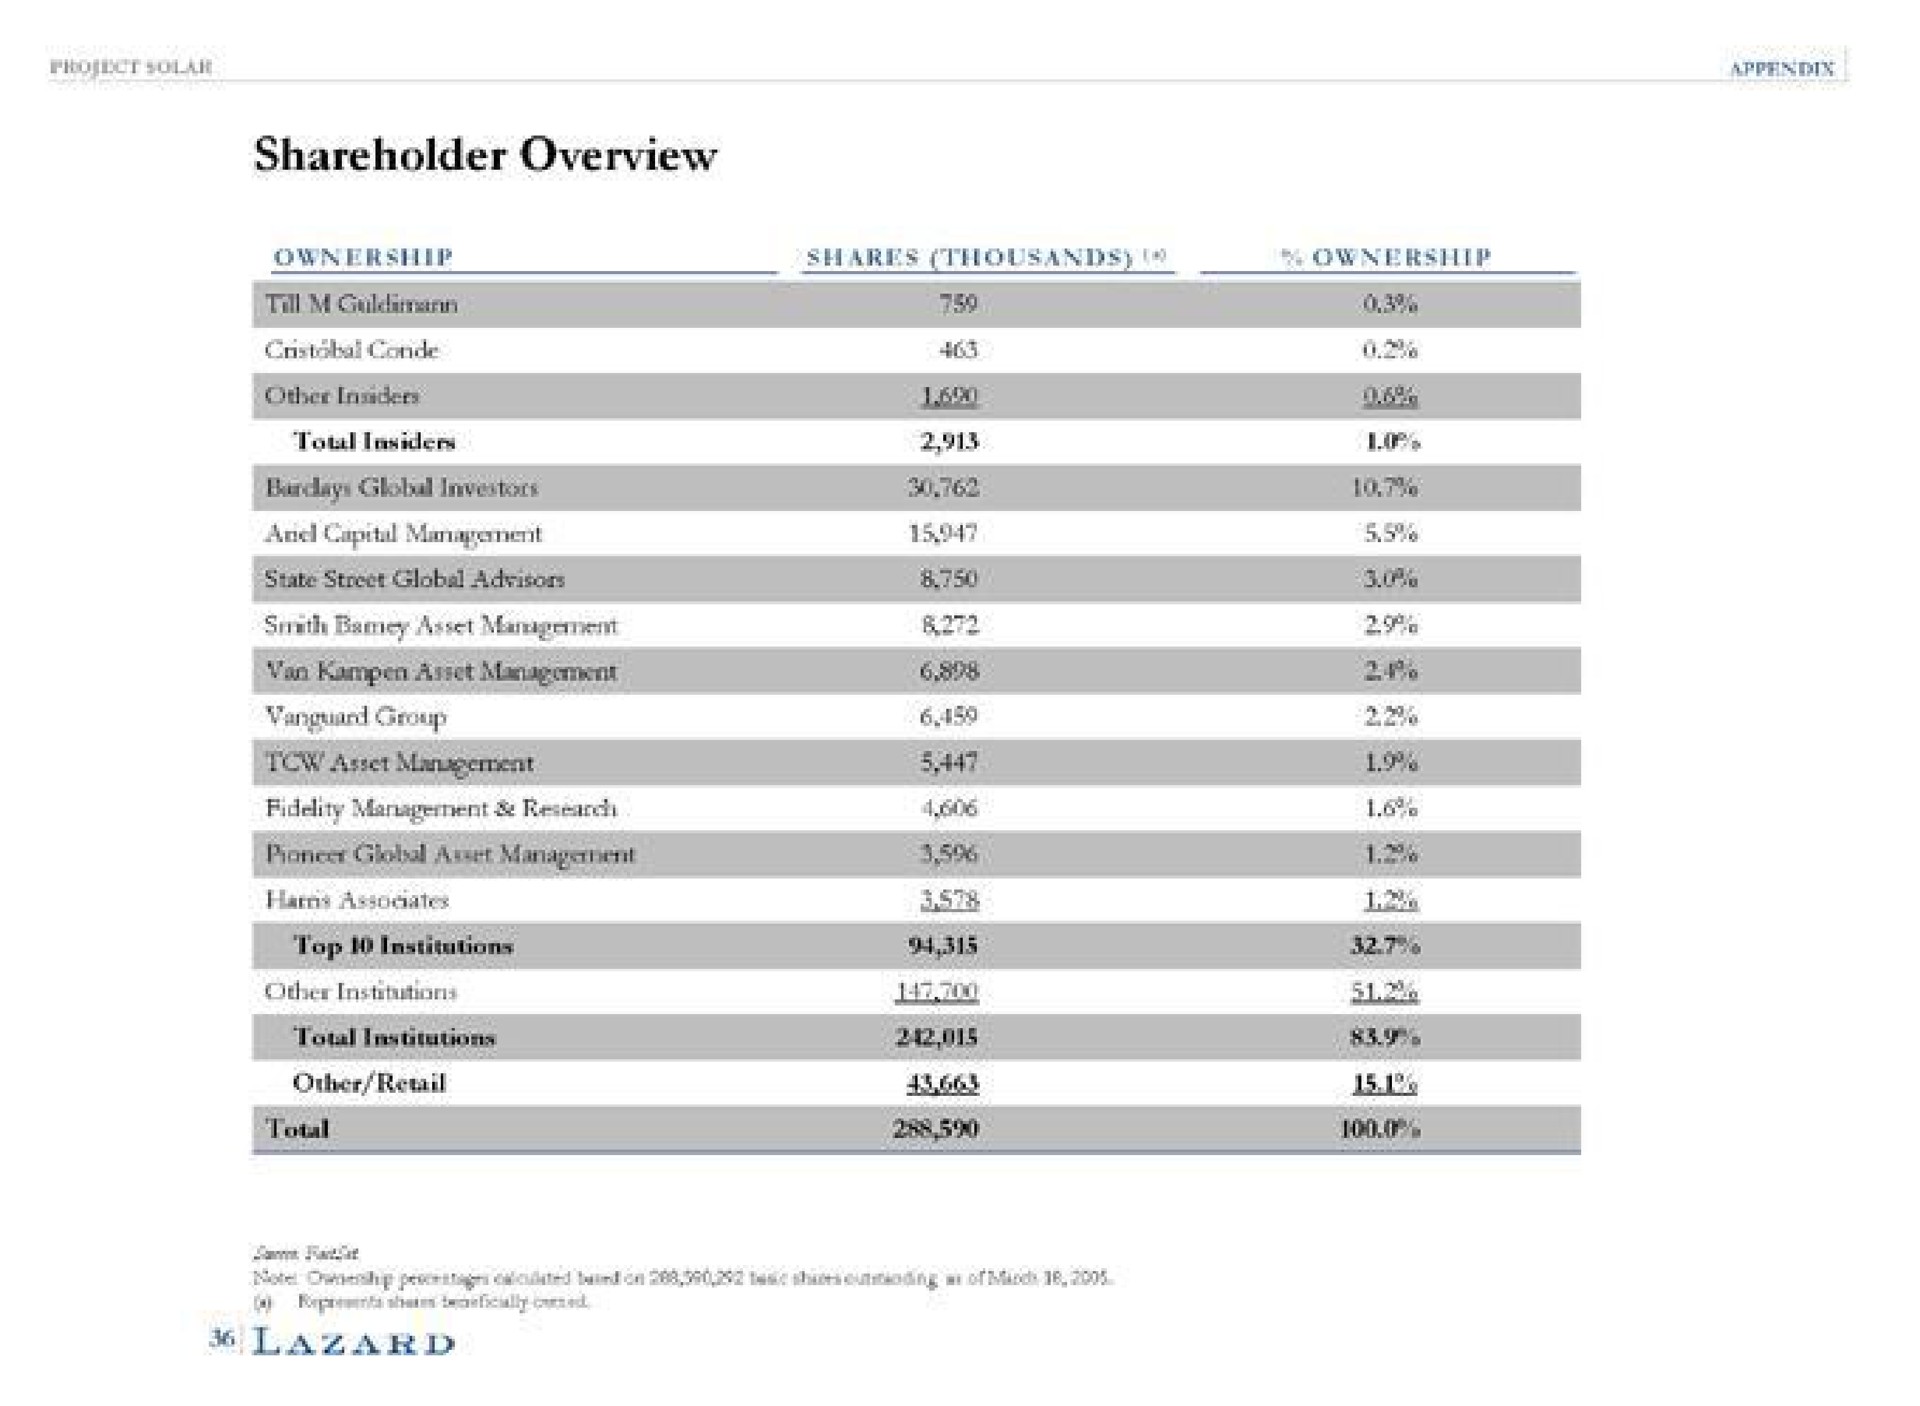 shareholder overview capital fidelity management research aga | Lazard